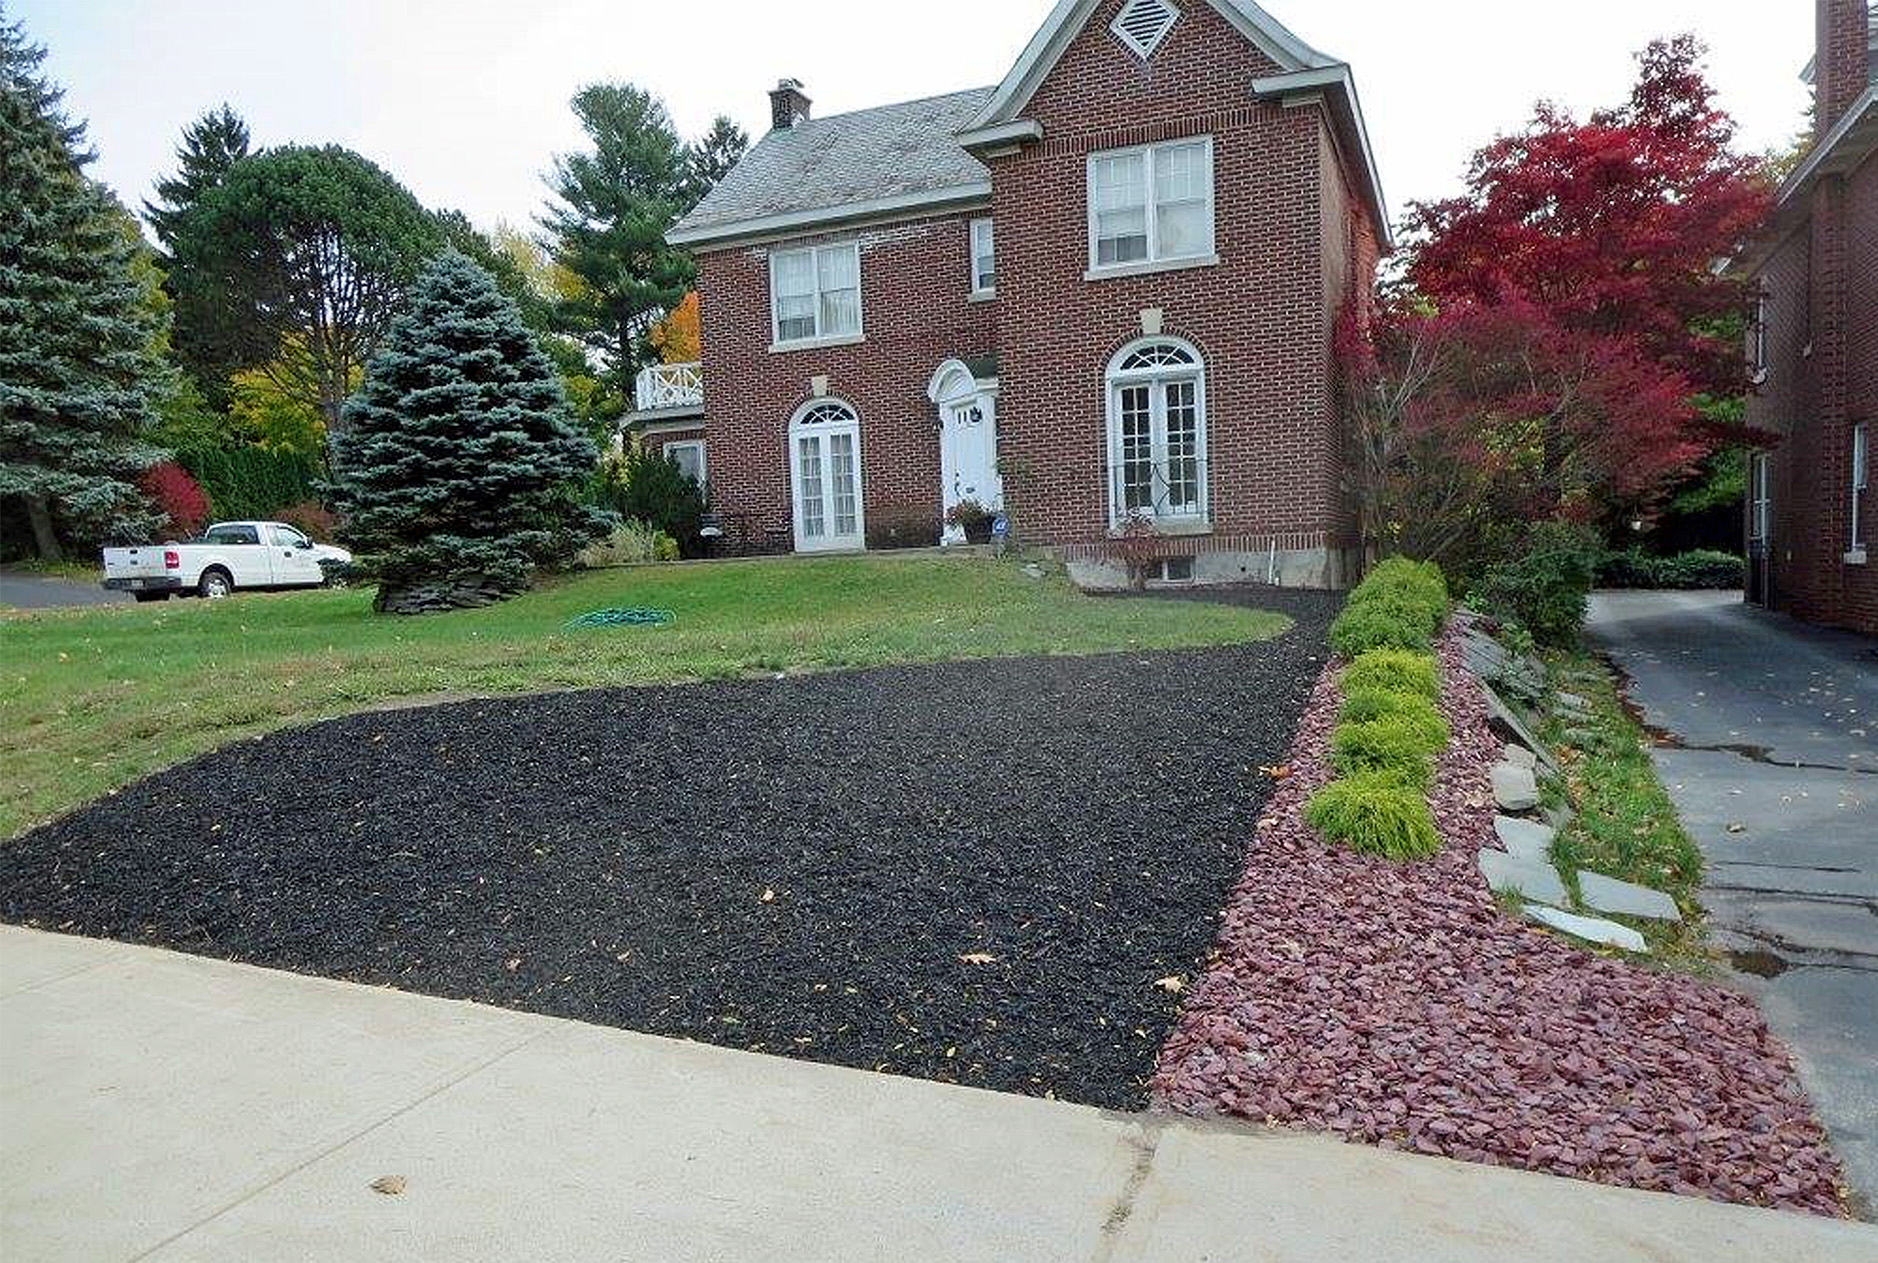 Thumbnail of newly mulched bed near driveway